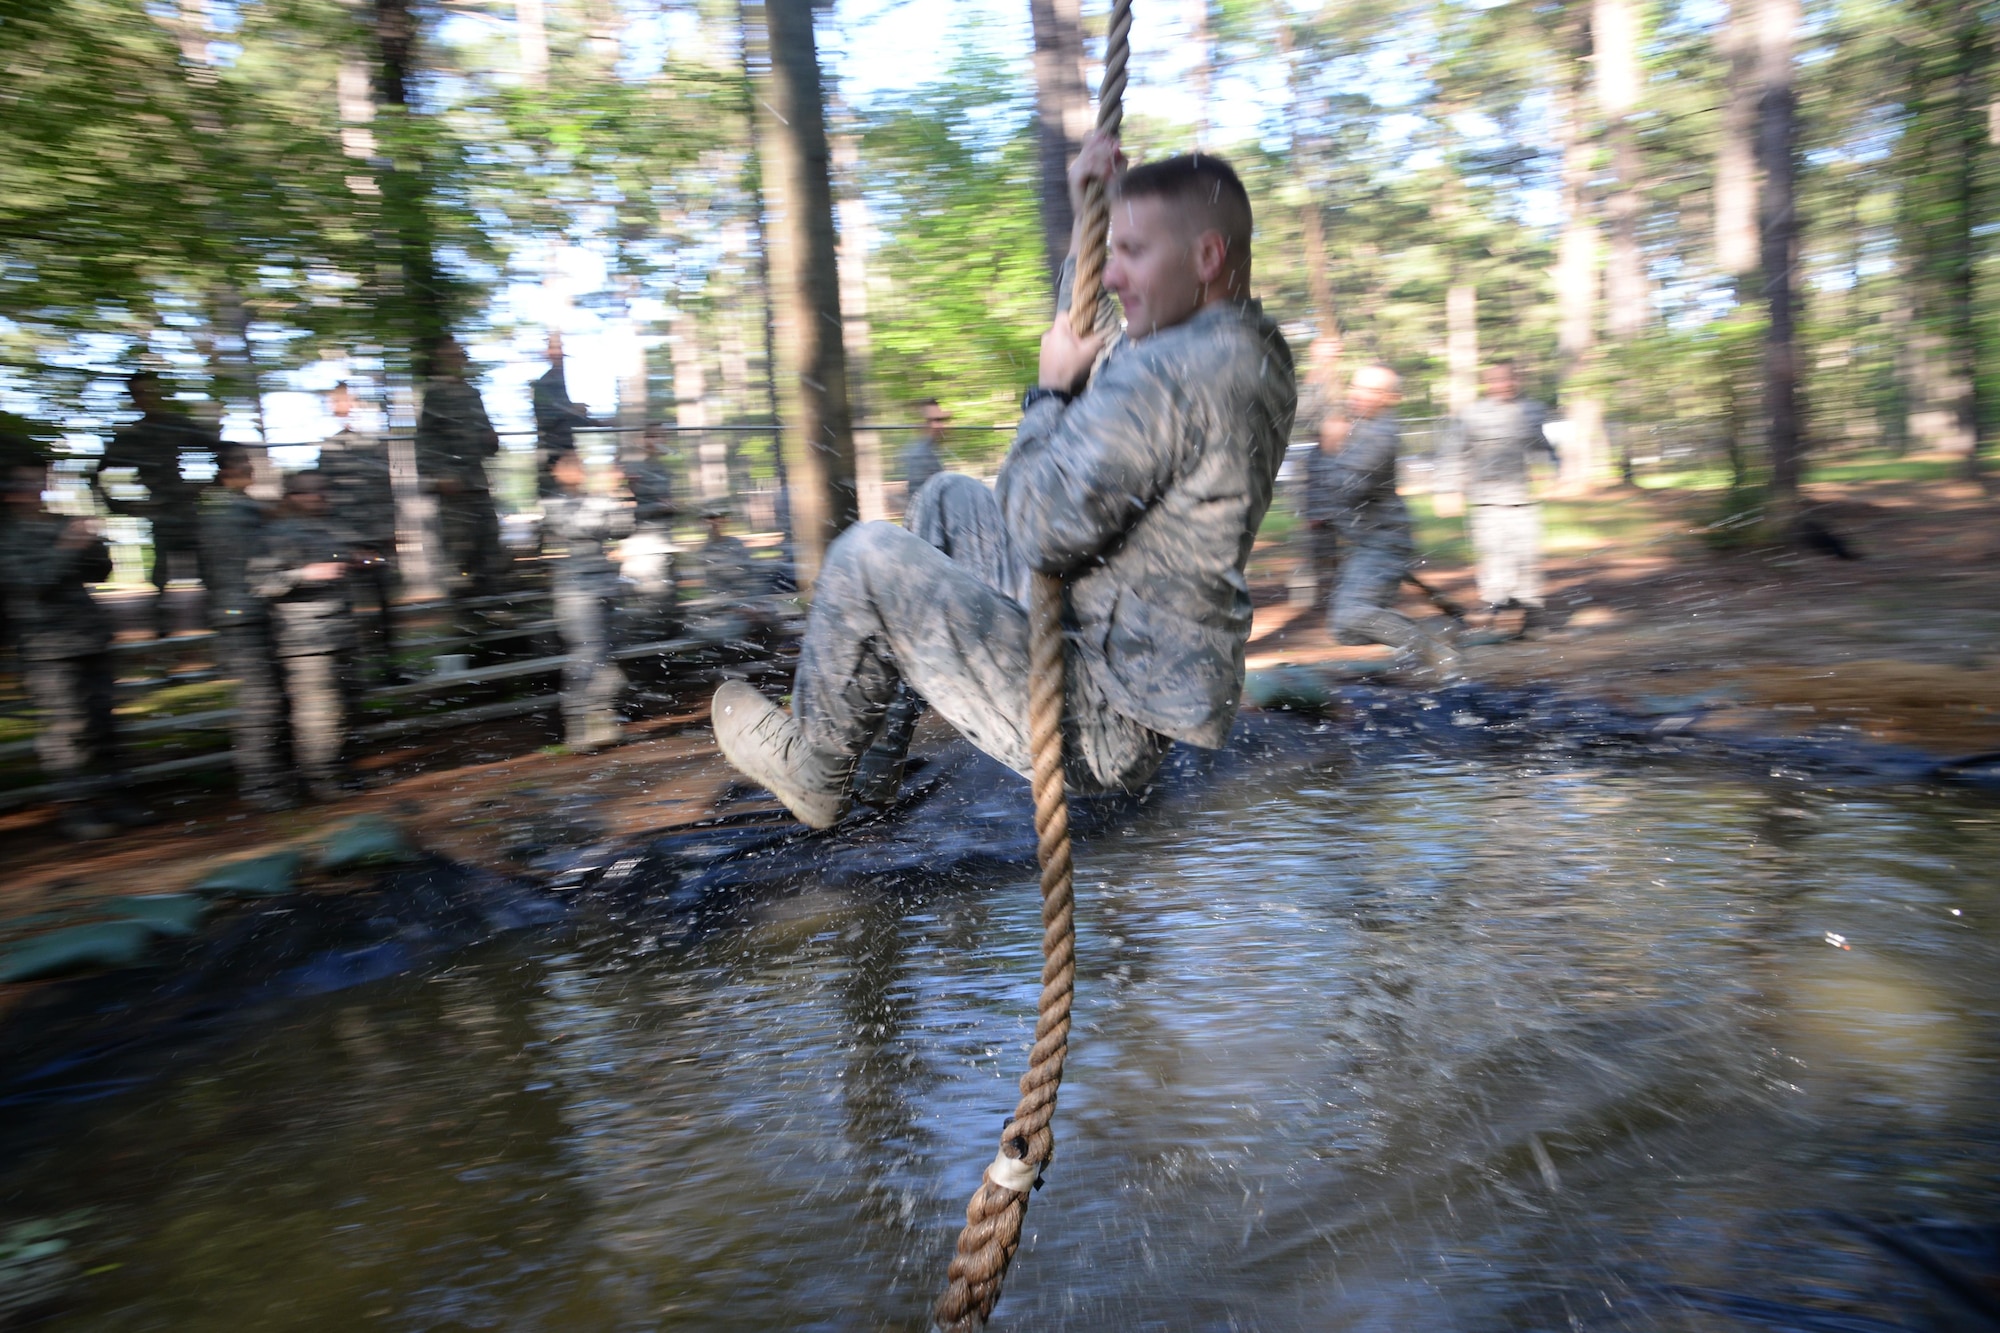 Commissioned Officer Training student swings across the last obstacle of the Officer Training School’s Vigilant Warrior training site, April 25, 2017, Maxwell Air Force Base, Ala. Unlike Total Force Officer Training cadets, COT students enter training with officer rank and are recruited to serve in specialized career fields. (U.S. Air Force photo/ Senior Airman Alexa Culbert)